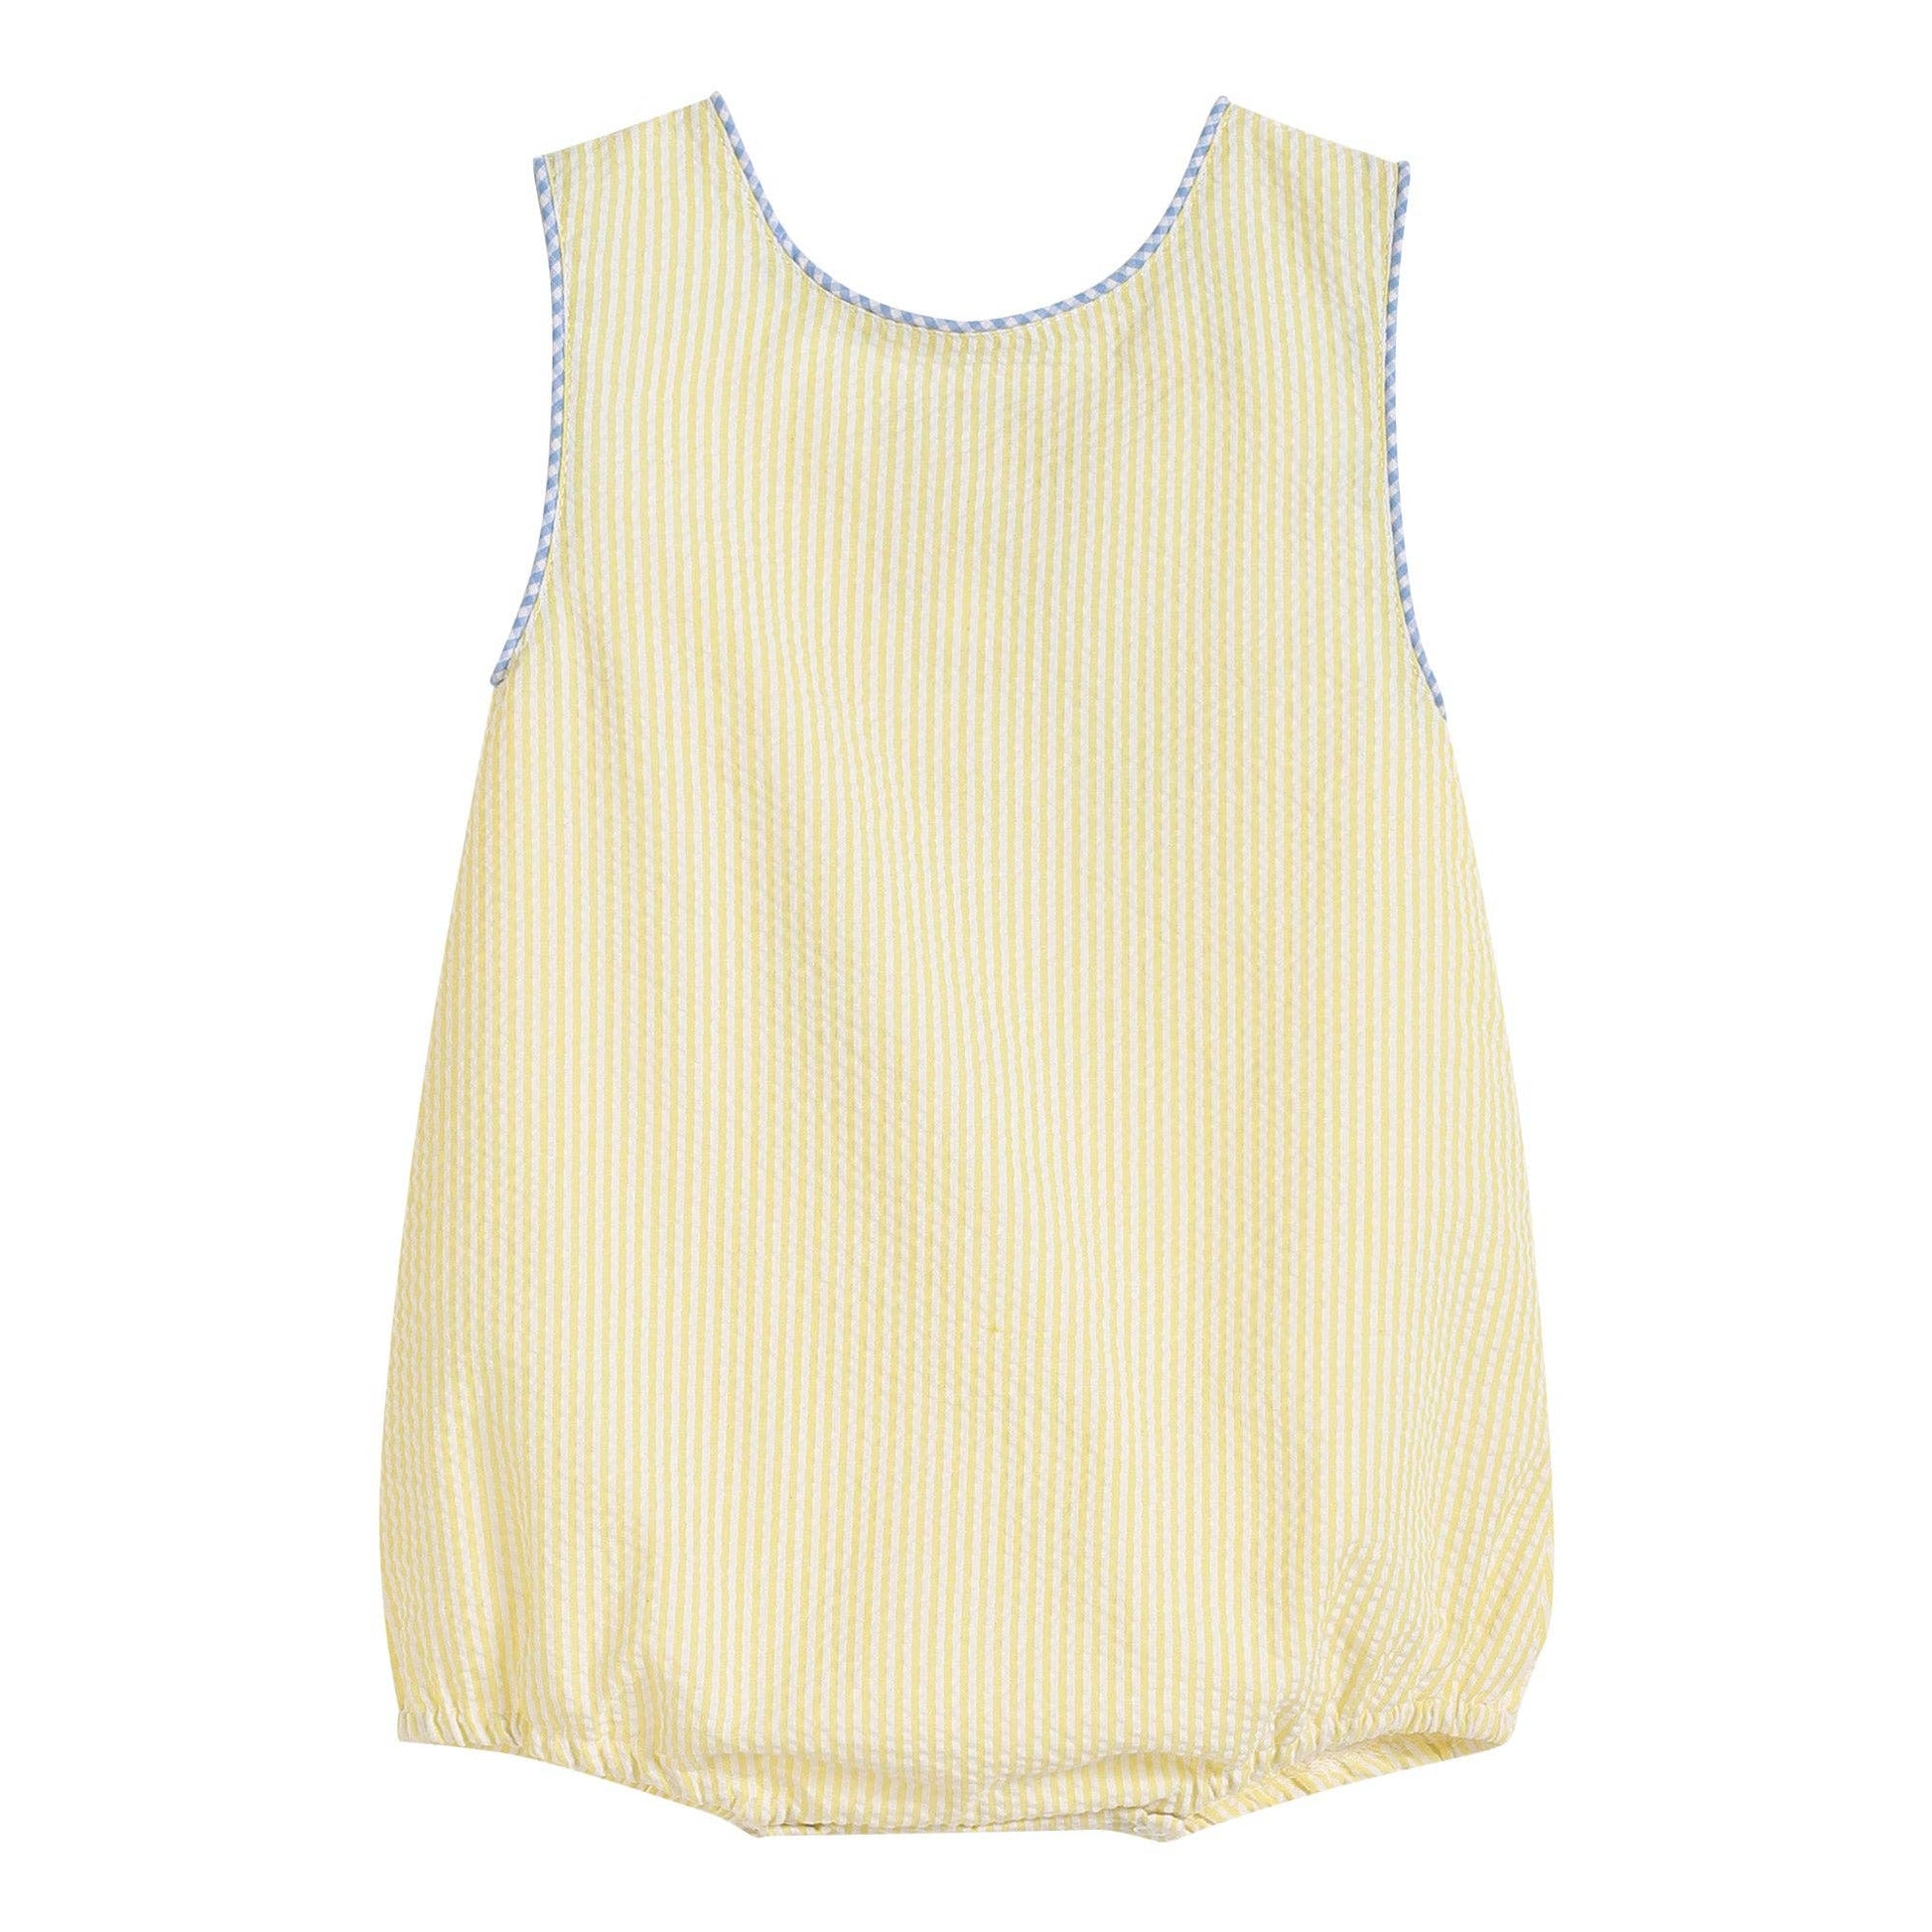 A Yellow Seersucker Turtle Baby Romper: 12-18M made by Lil Cactus, perfect for summer.